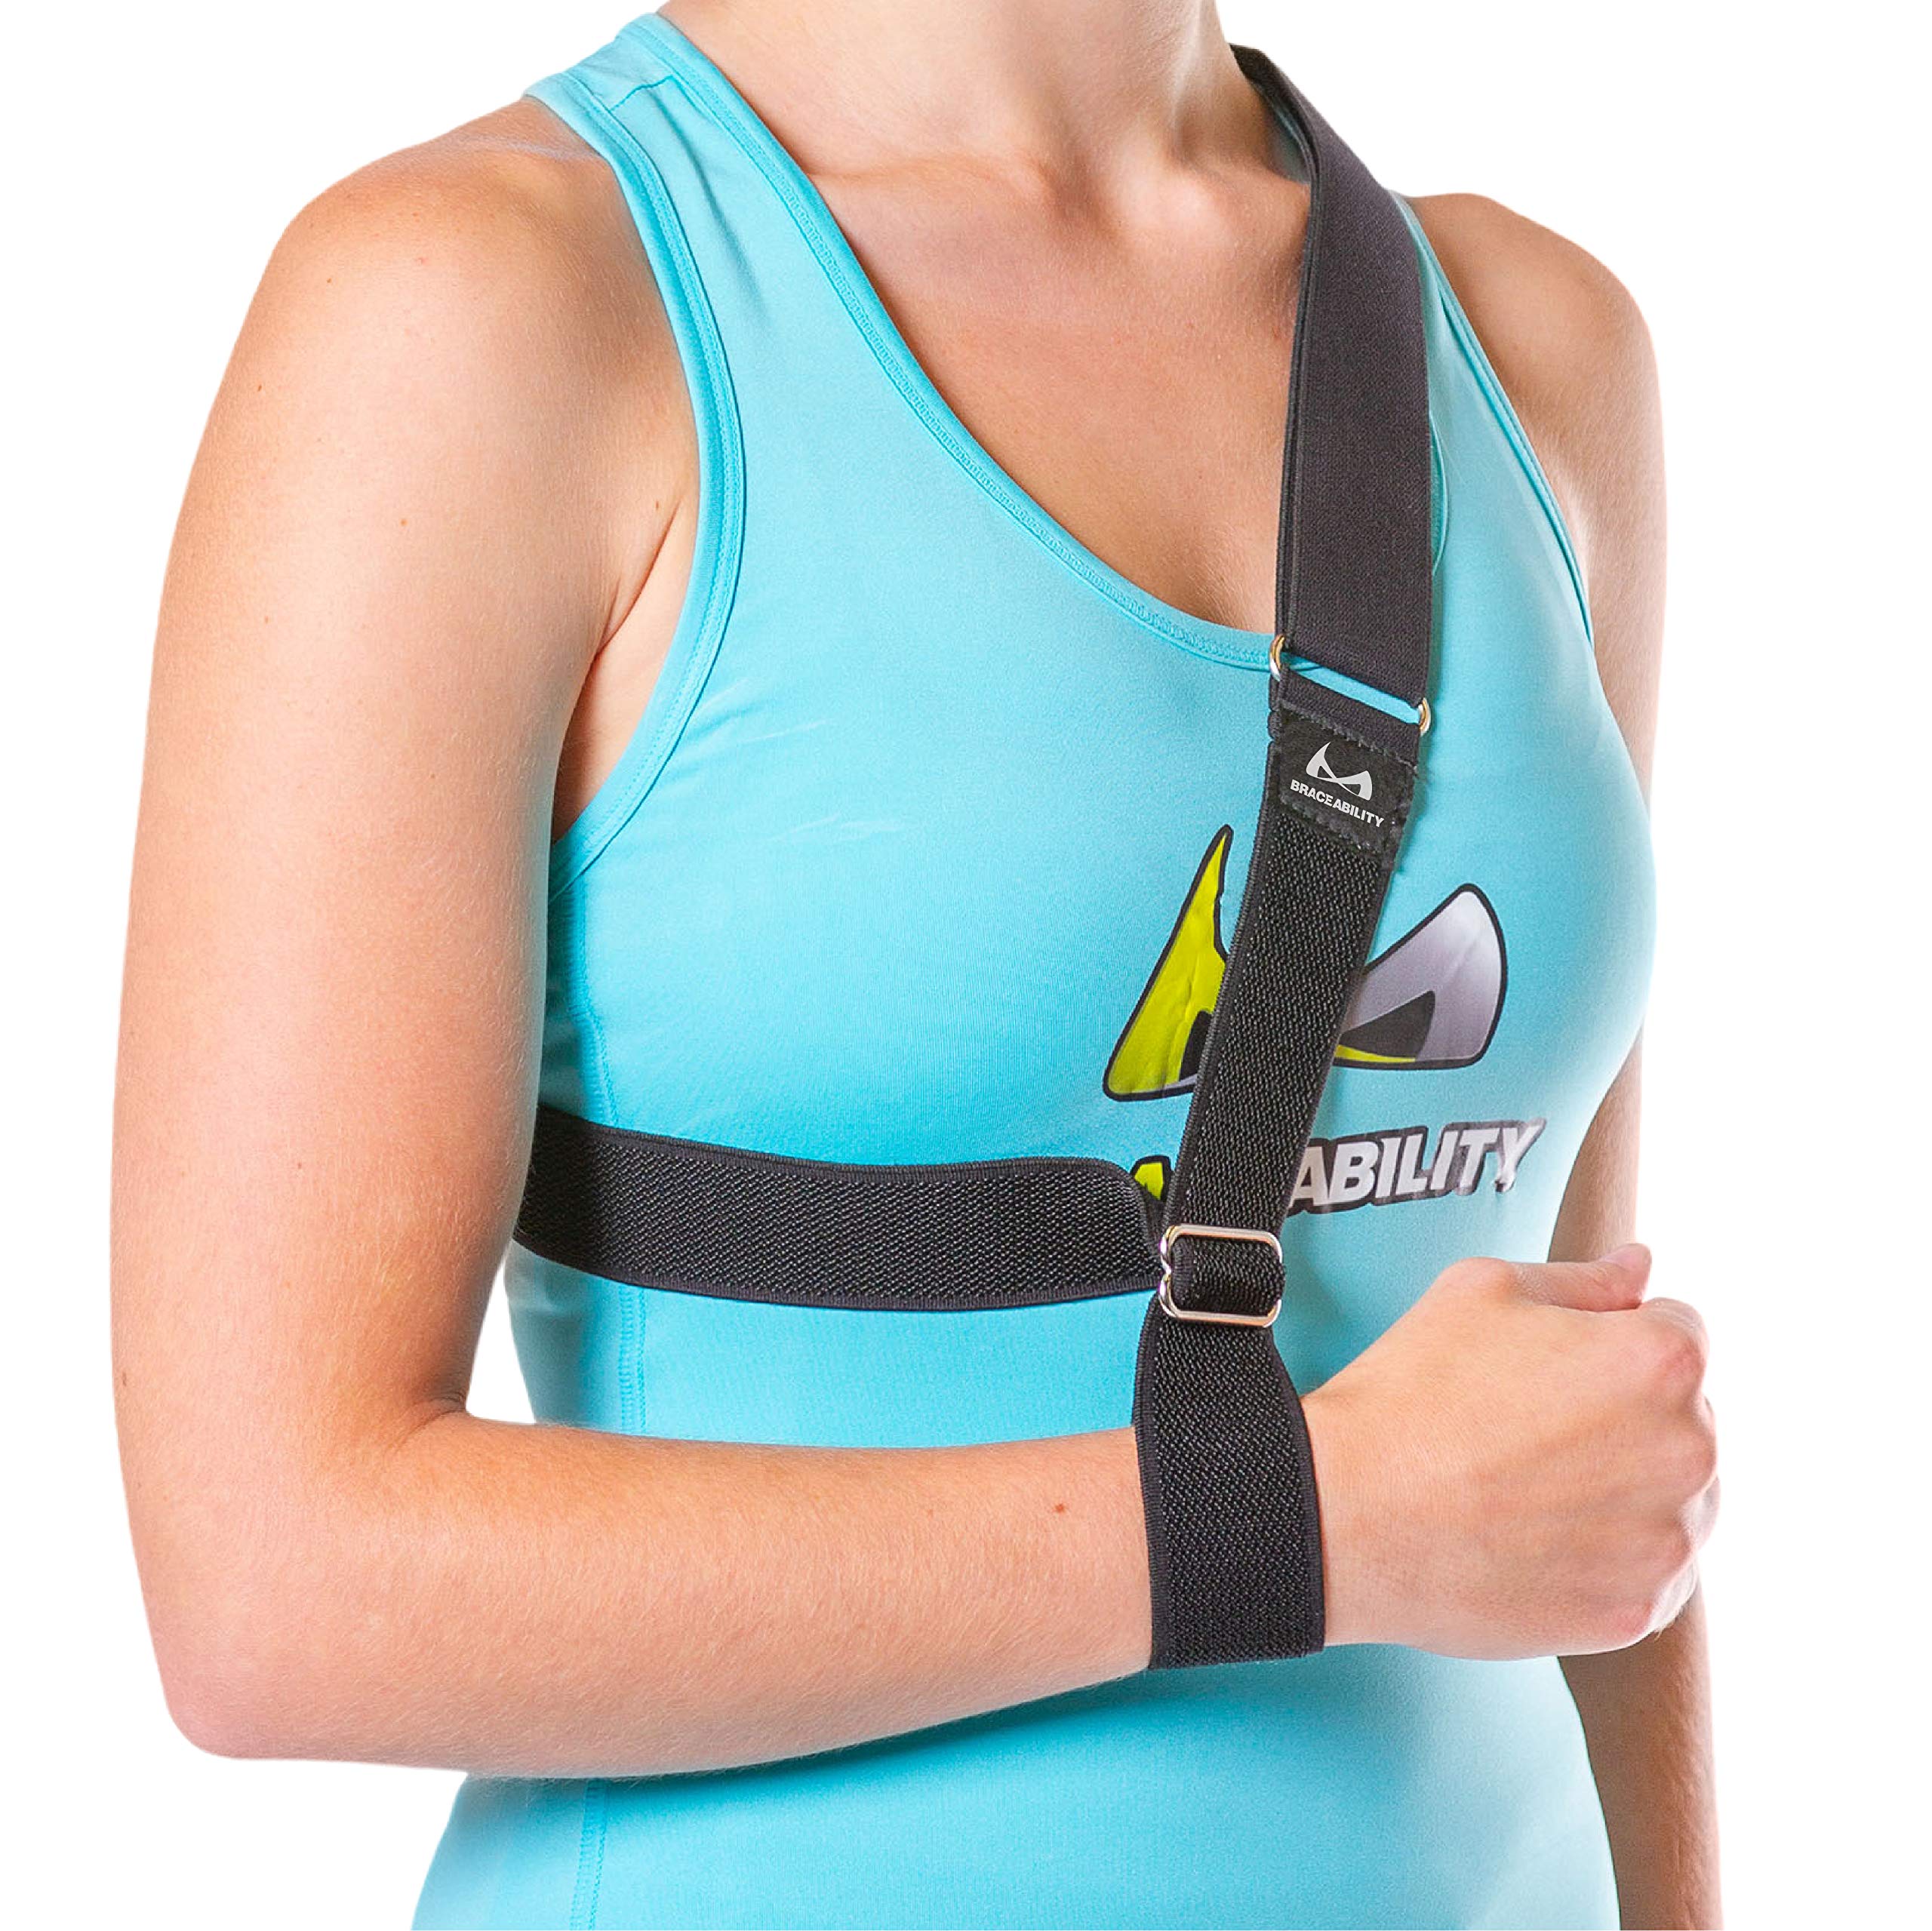 The Shoulder Sling - Patented Arm Support Strap and Waterproof